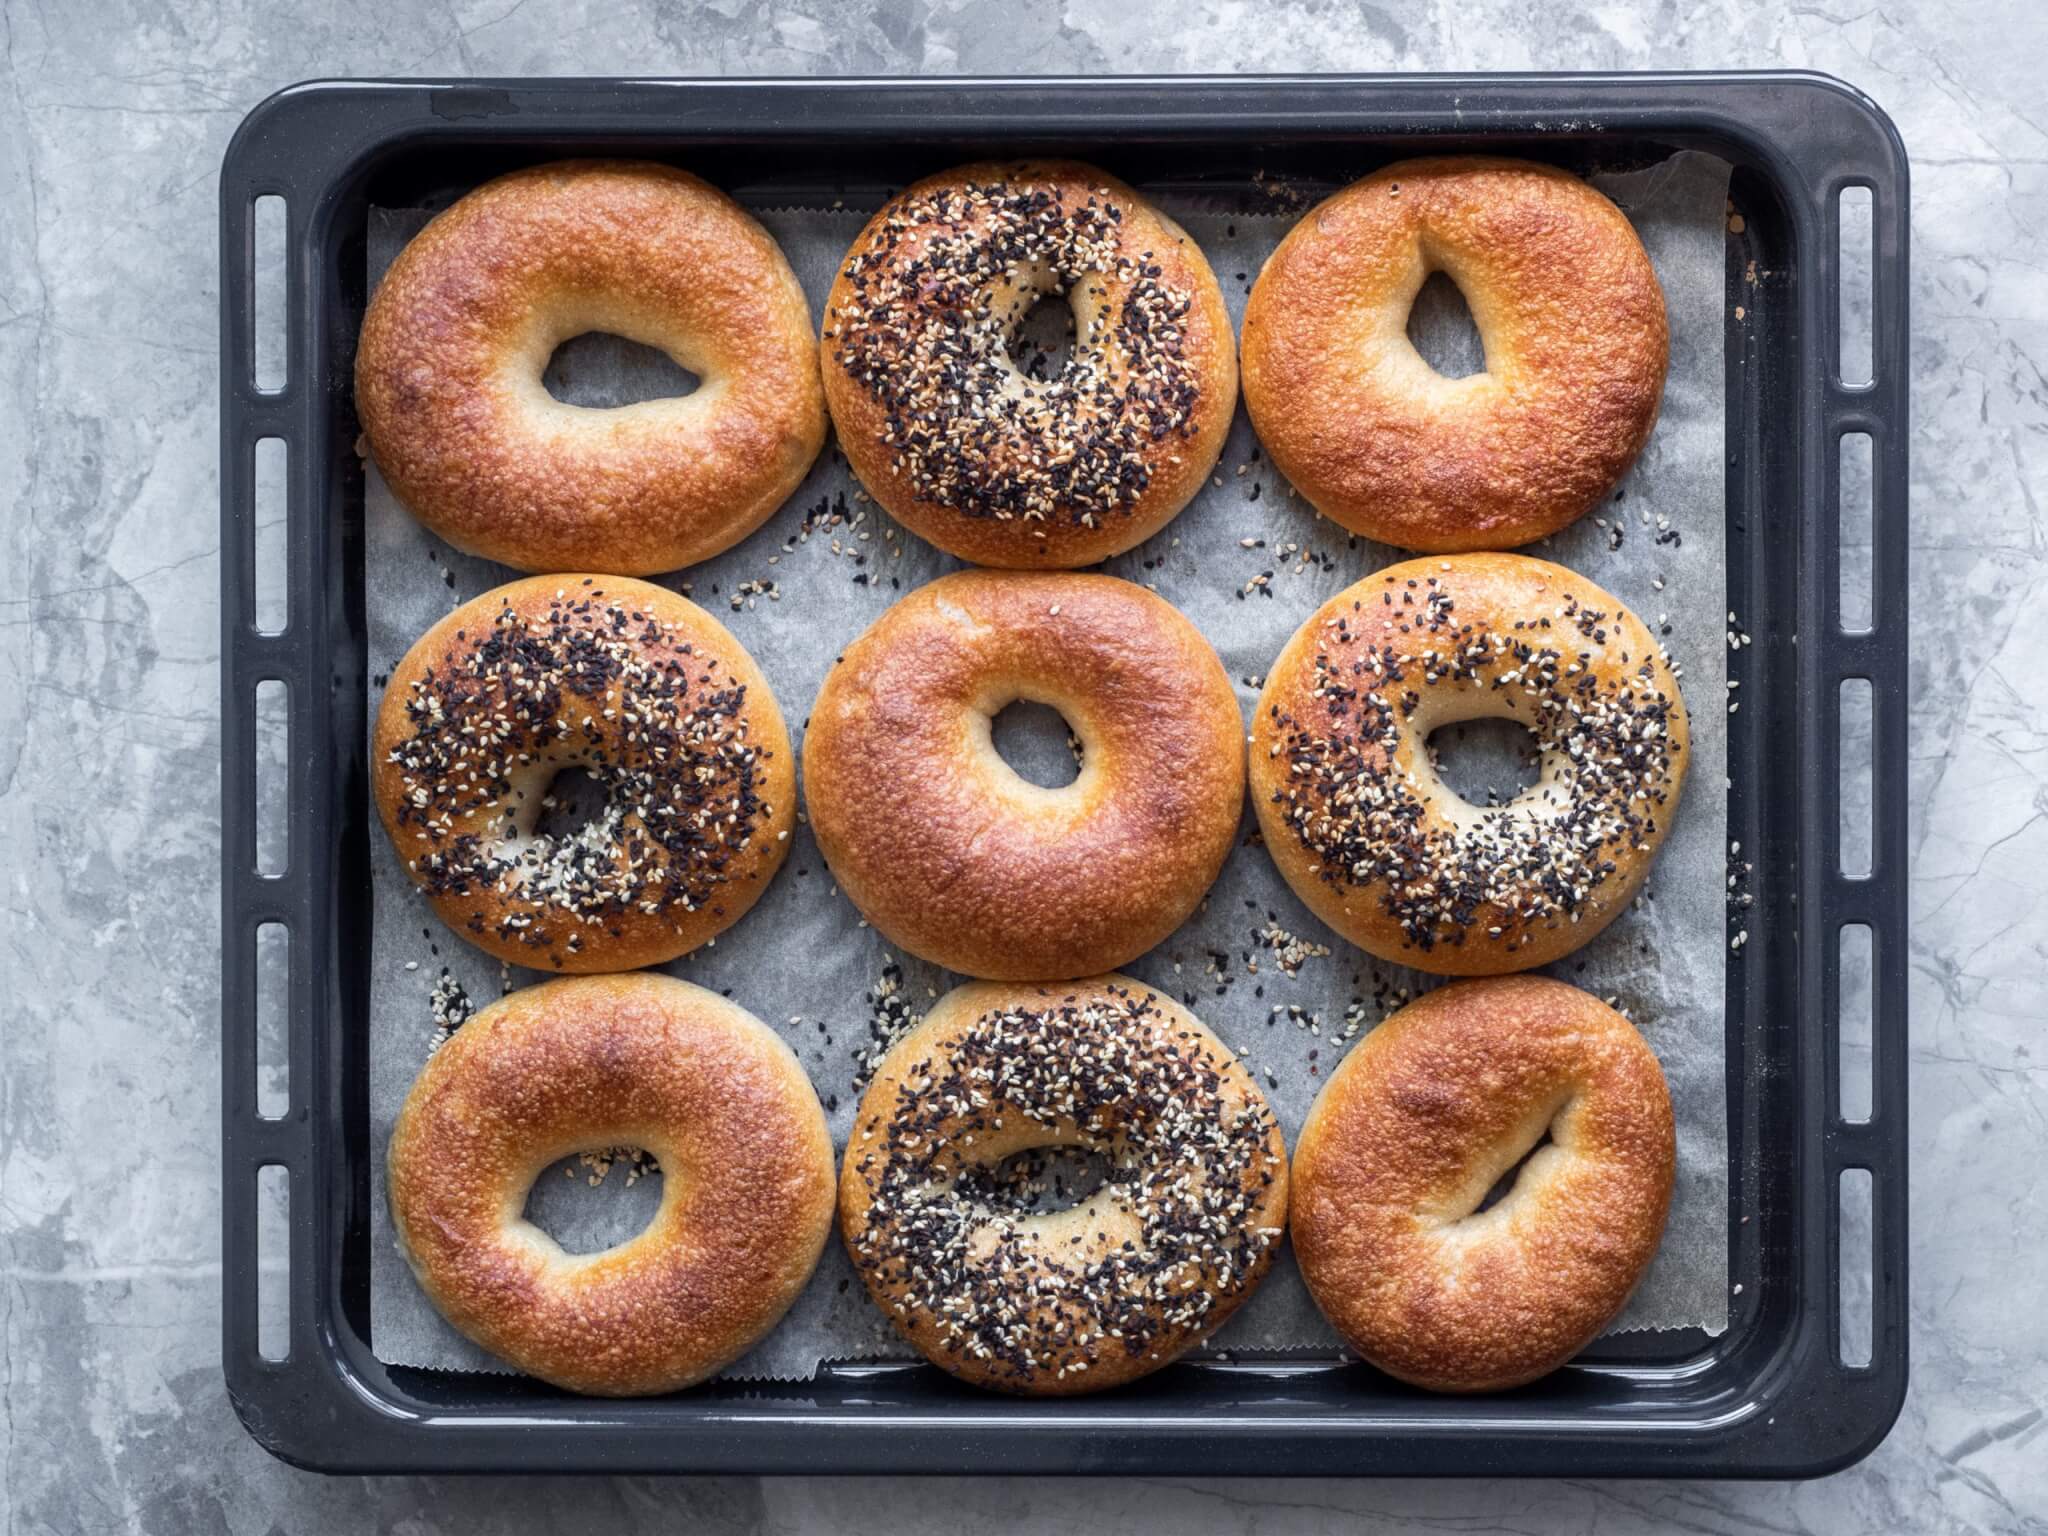 Tray bagels fresh out of the oven always taste the best.